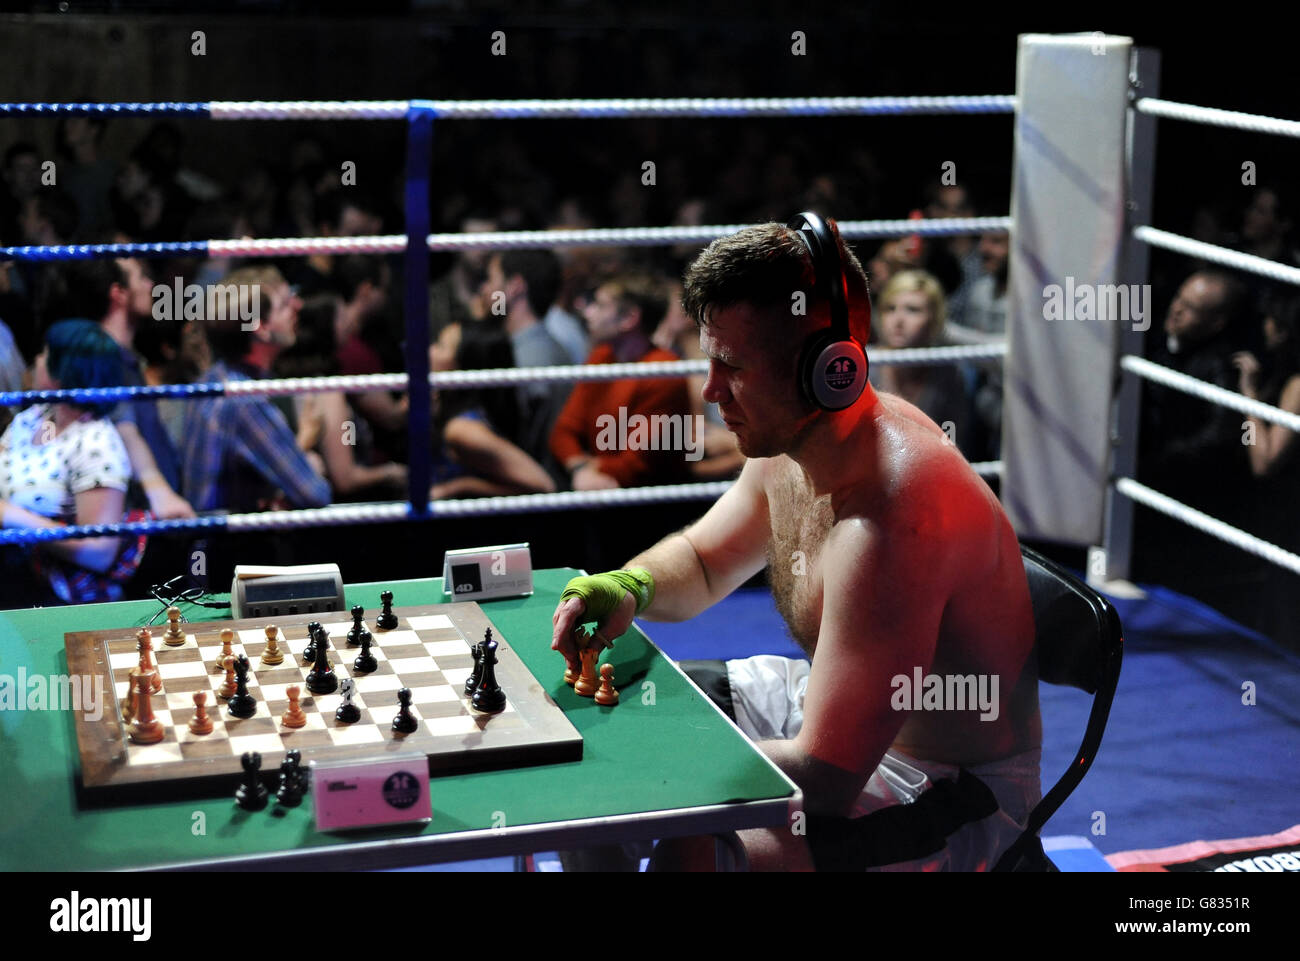 TKO By Checkmate: Inside the World of Chessboxing, Arts & Culture